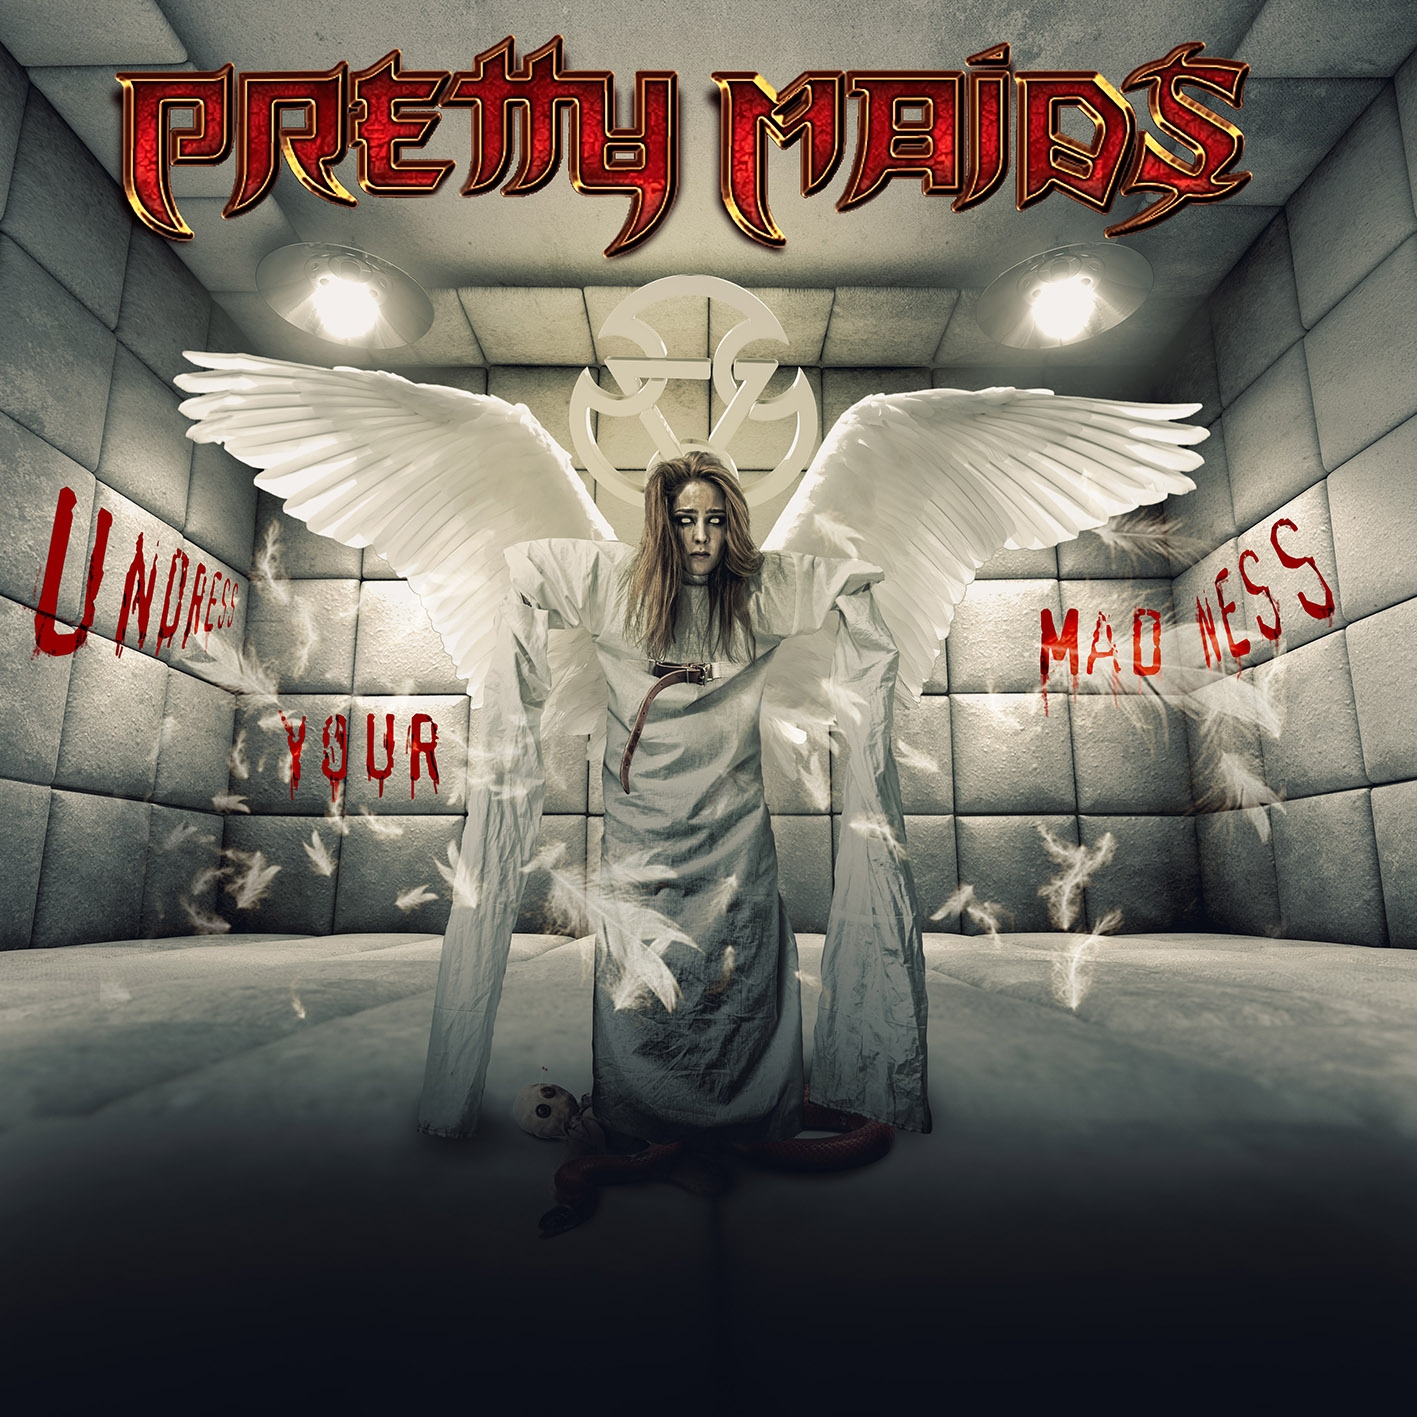 PRETTY MAIDS undress your madness COVER